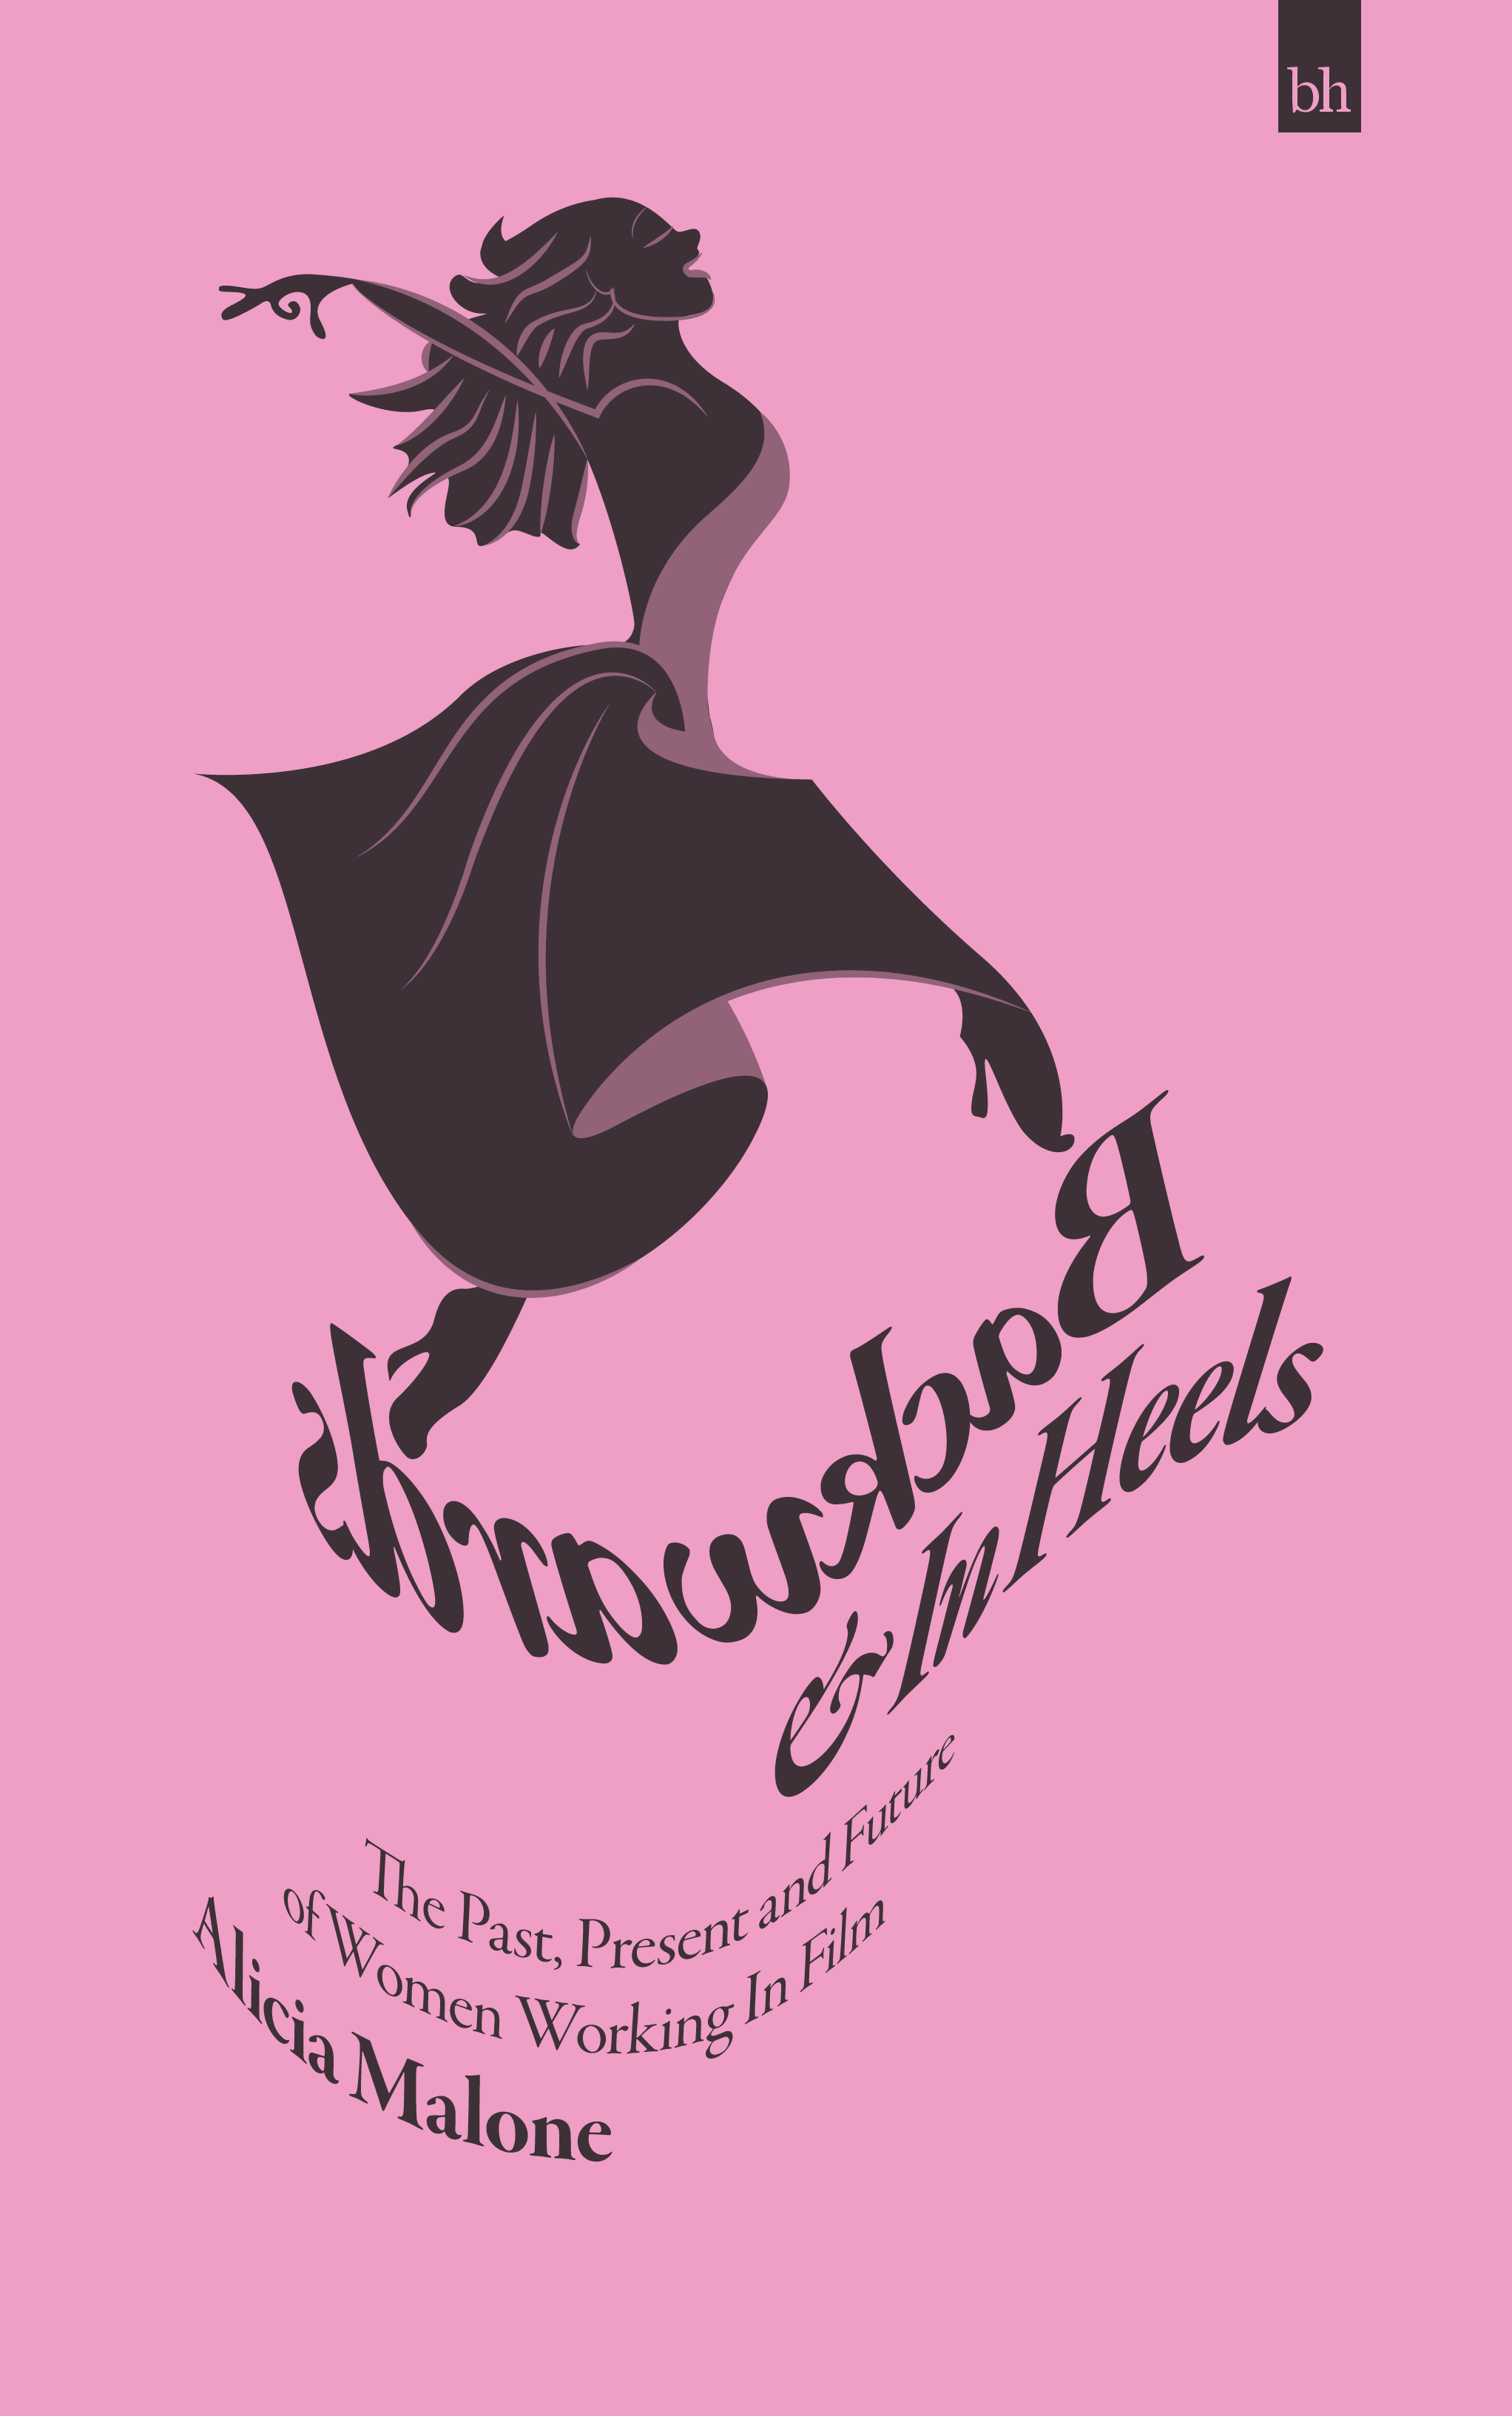 Book cover mock thumbnail for Backwards & In Heels: The Past, Present and Future of Women Working In Film